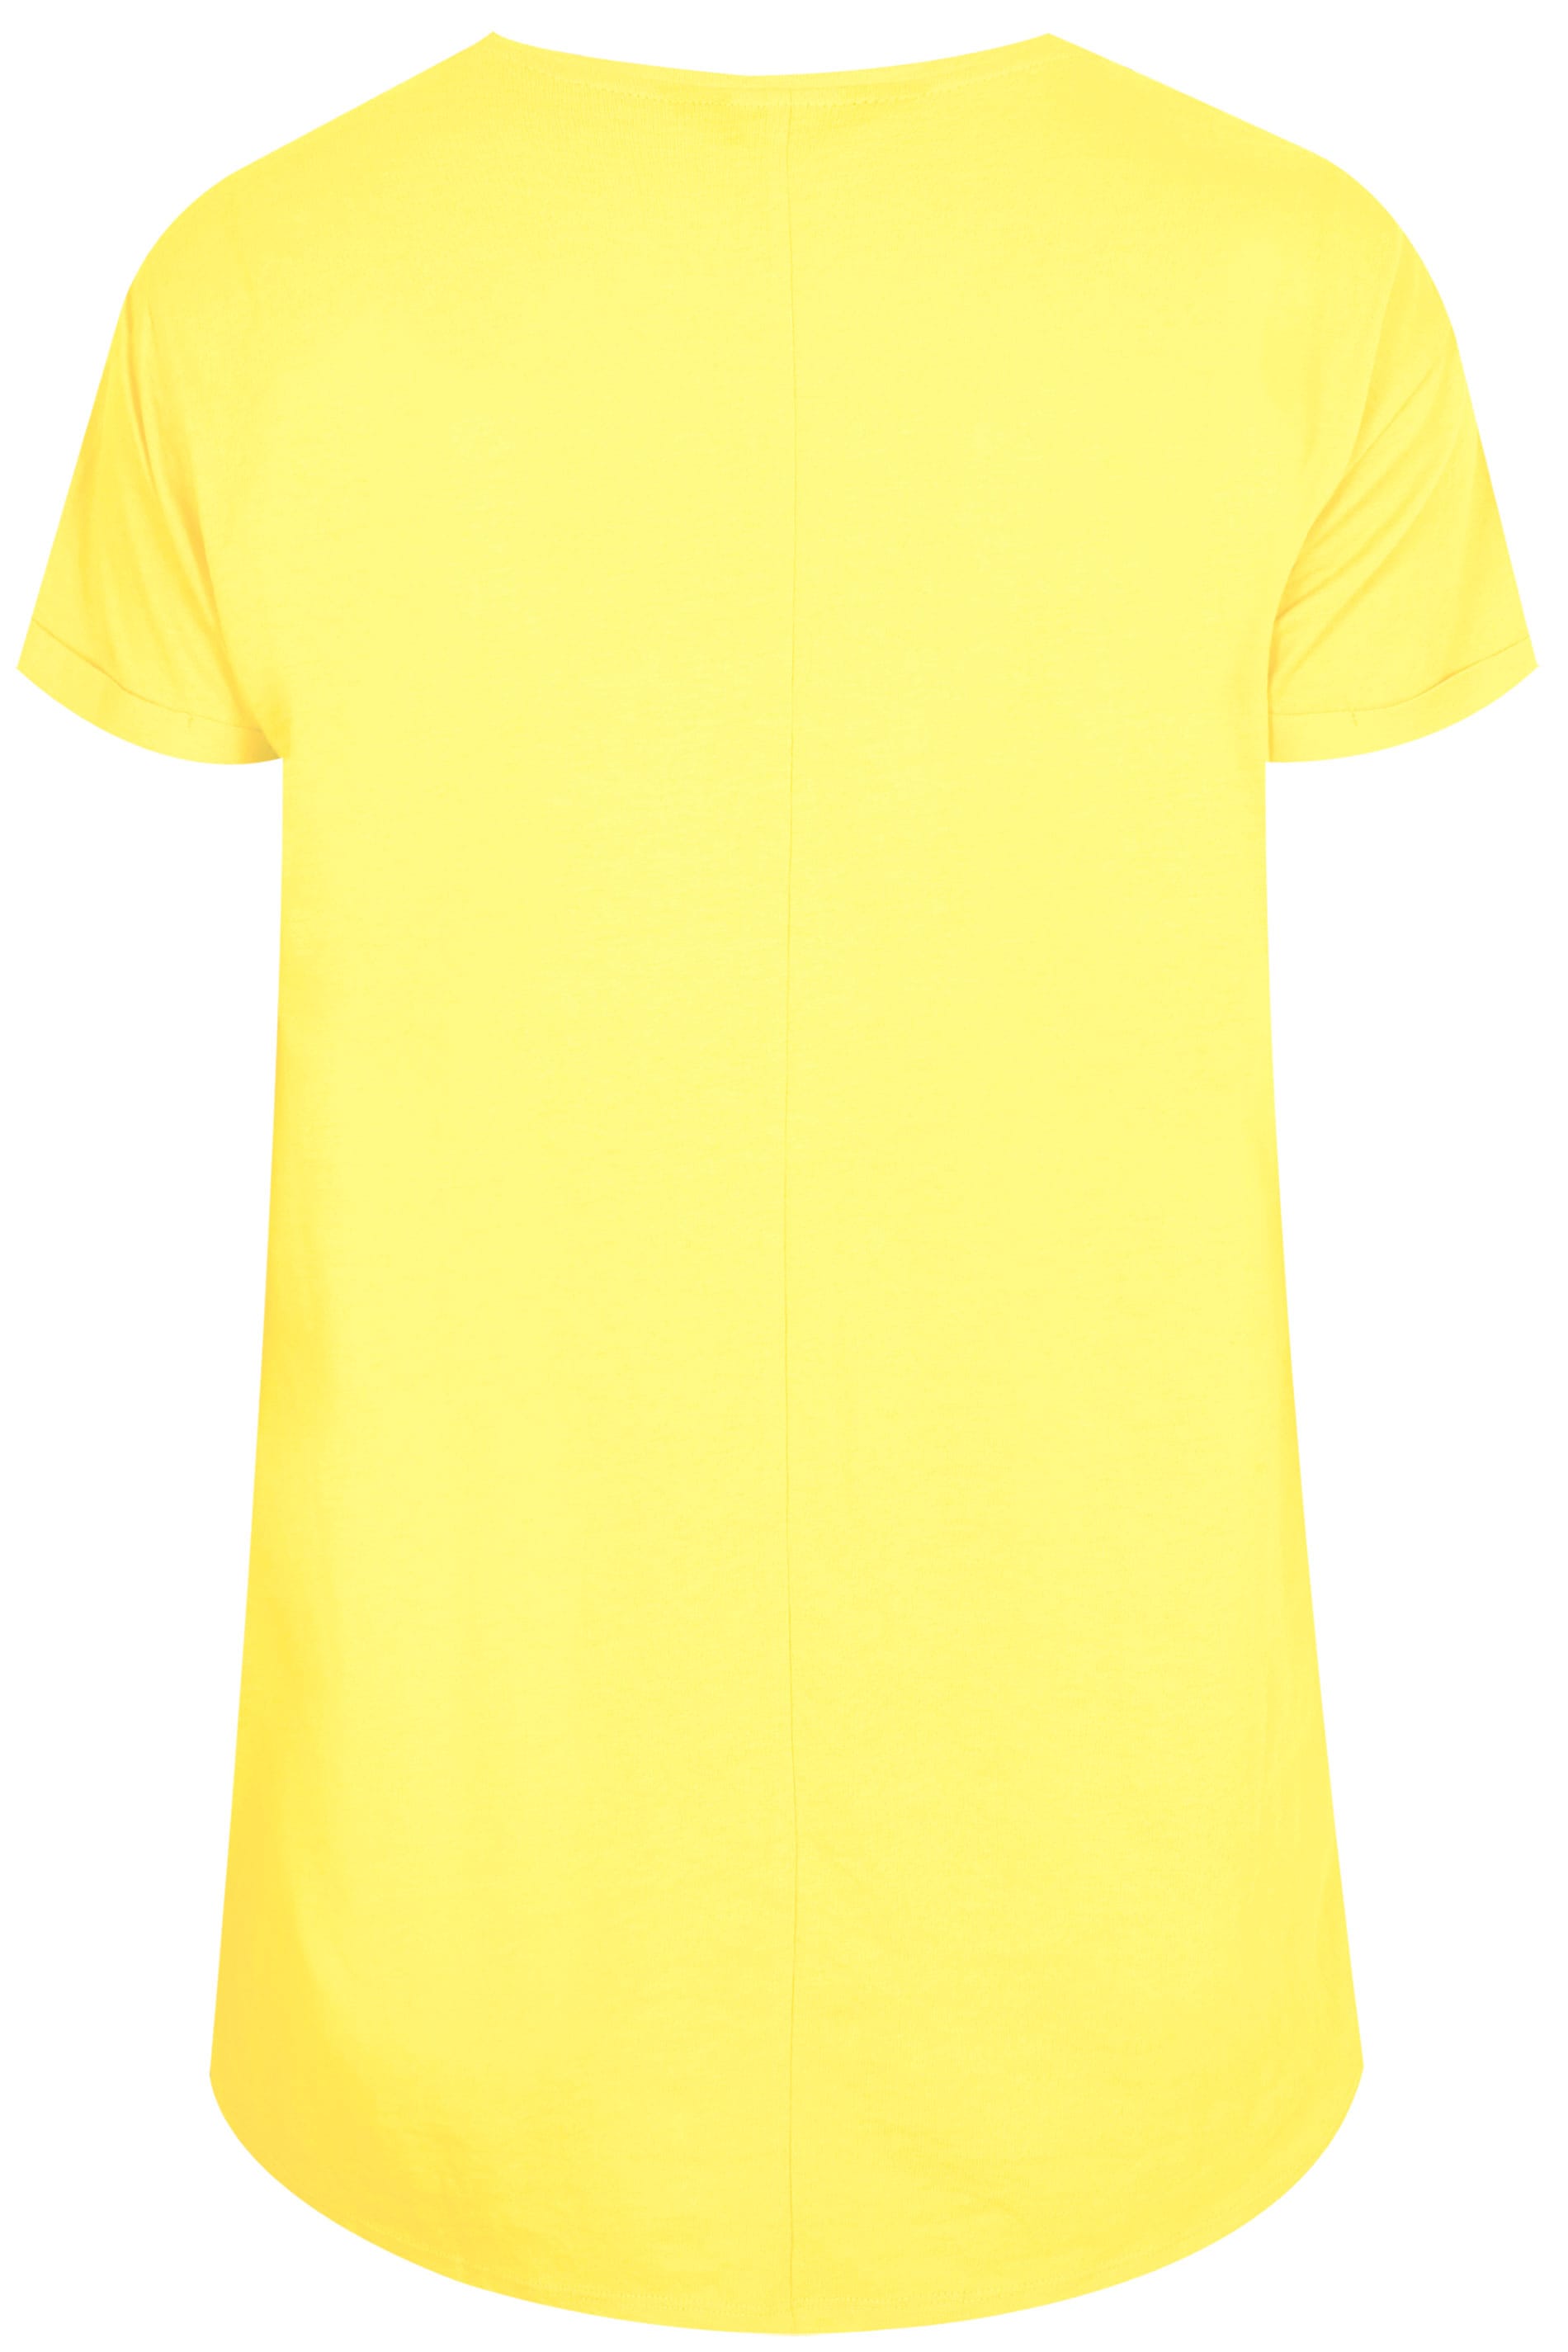 Yellow Mock Pocket T-Shirt | Plus Sizes 16 to 36 | Yours Clothing